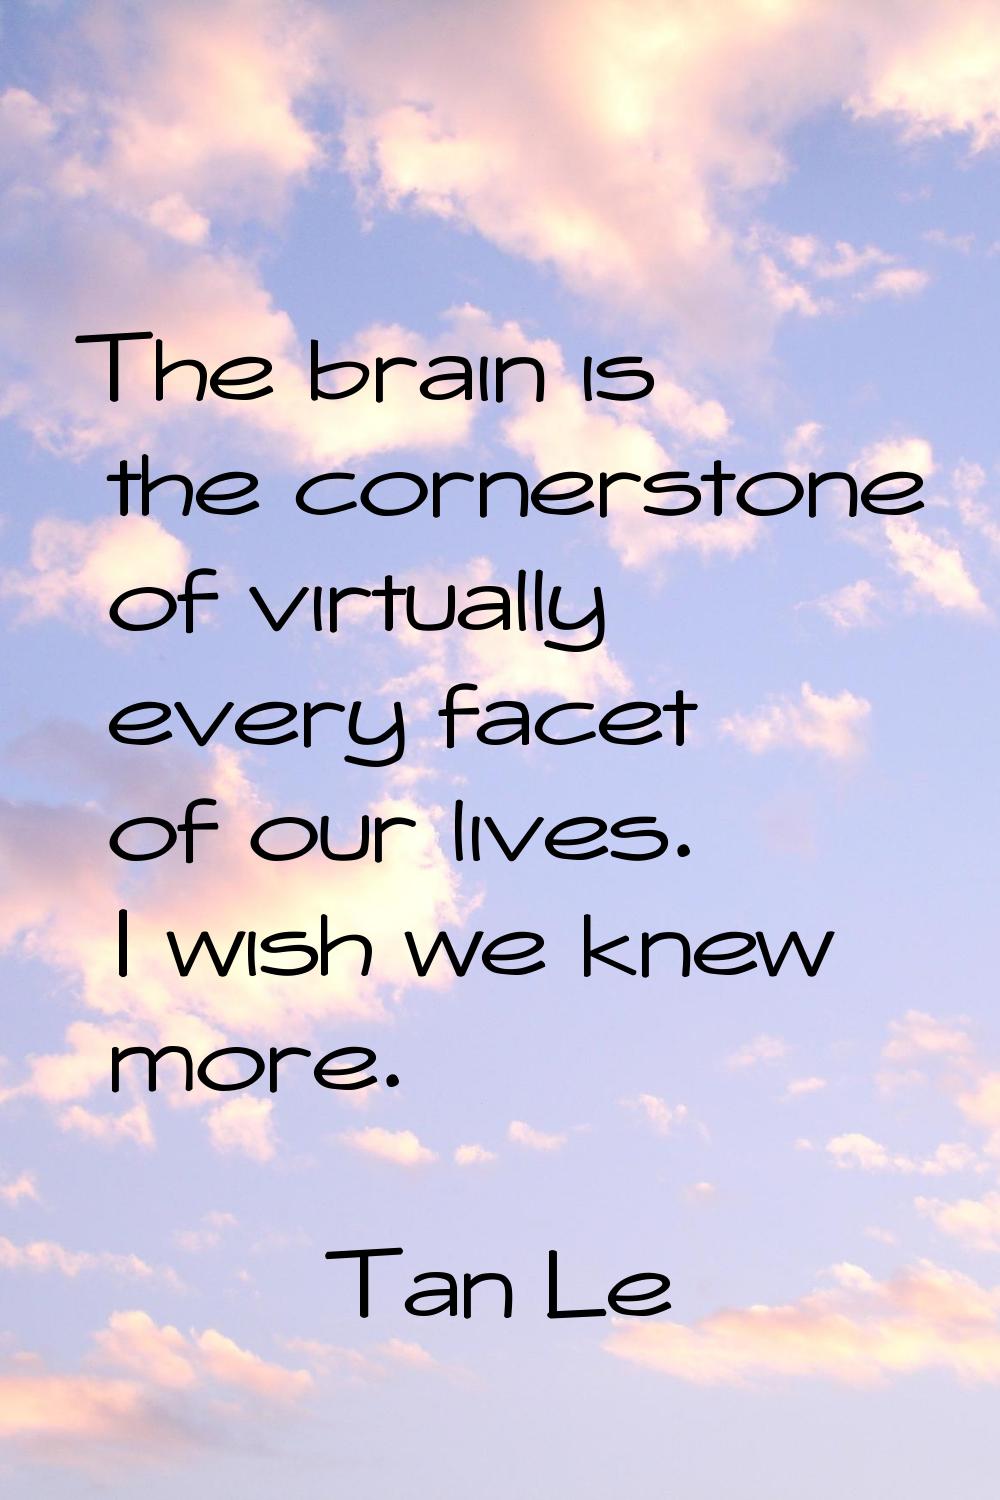 The brain is the cornerstone of virtually every facet of our lives. I wish we knew more.